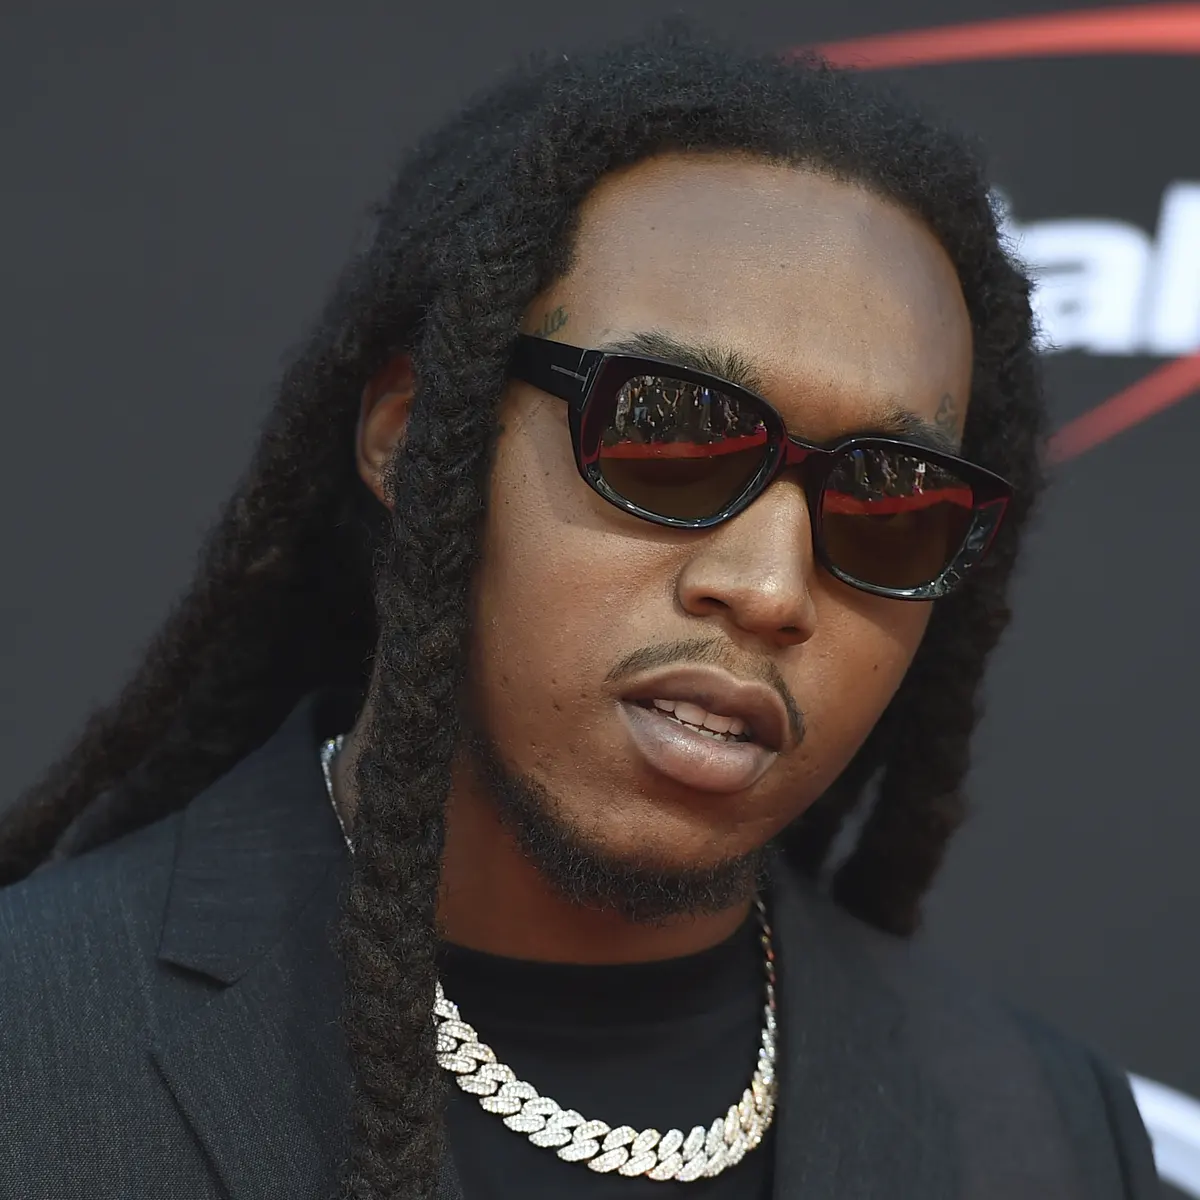 Meet Aaron Dotson: Basketball Player Rumoured To Be Rapper Takeoff